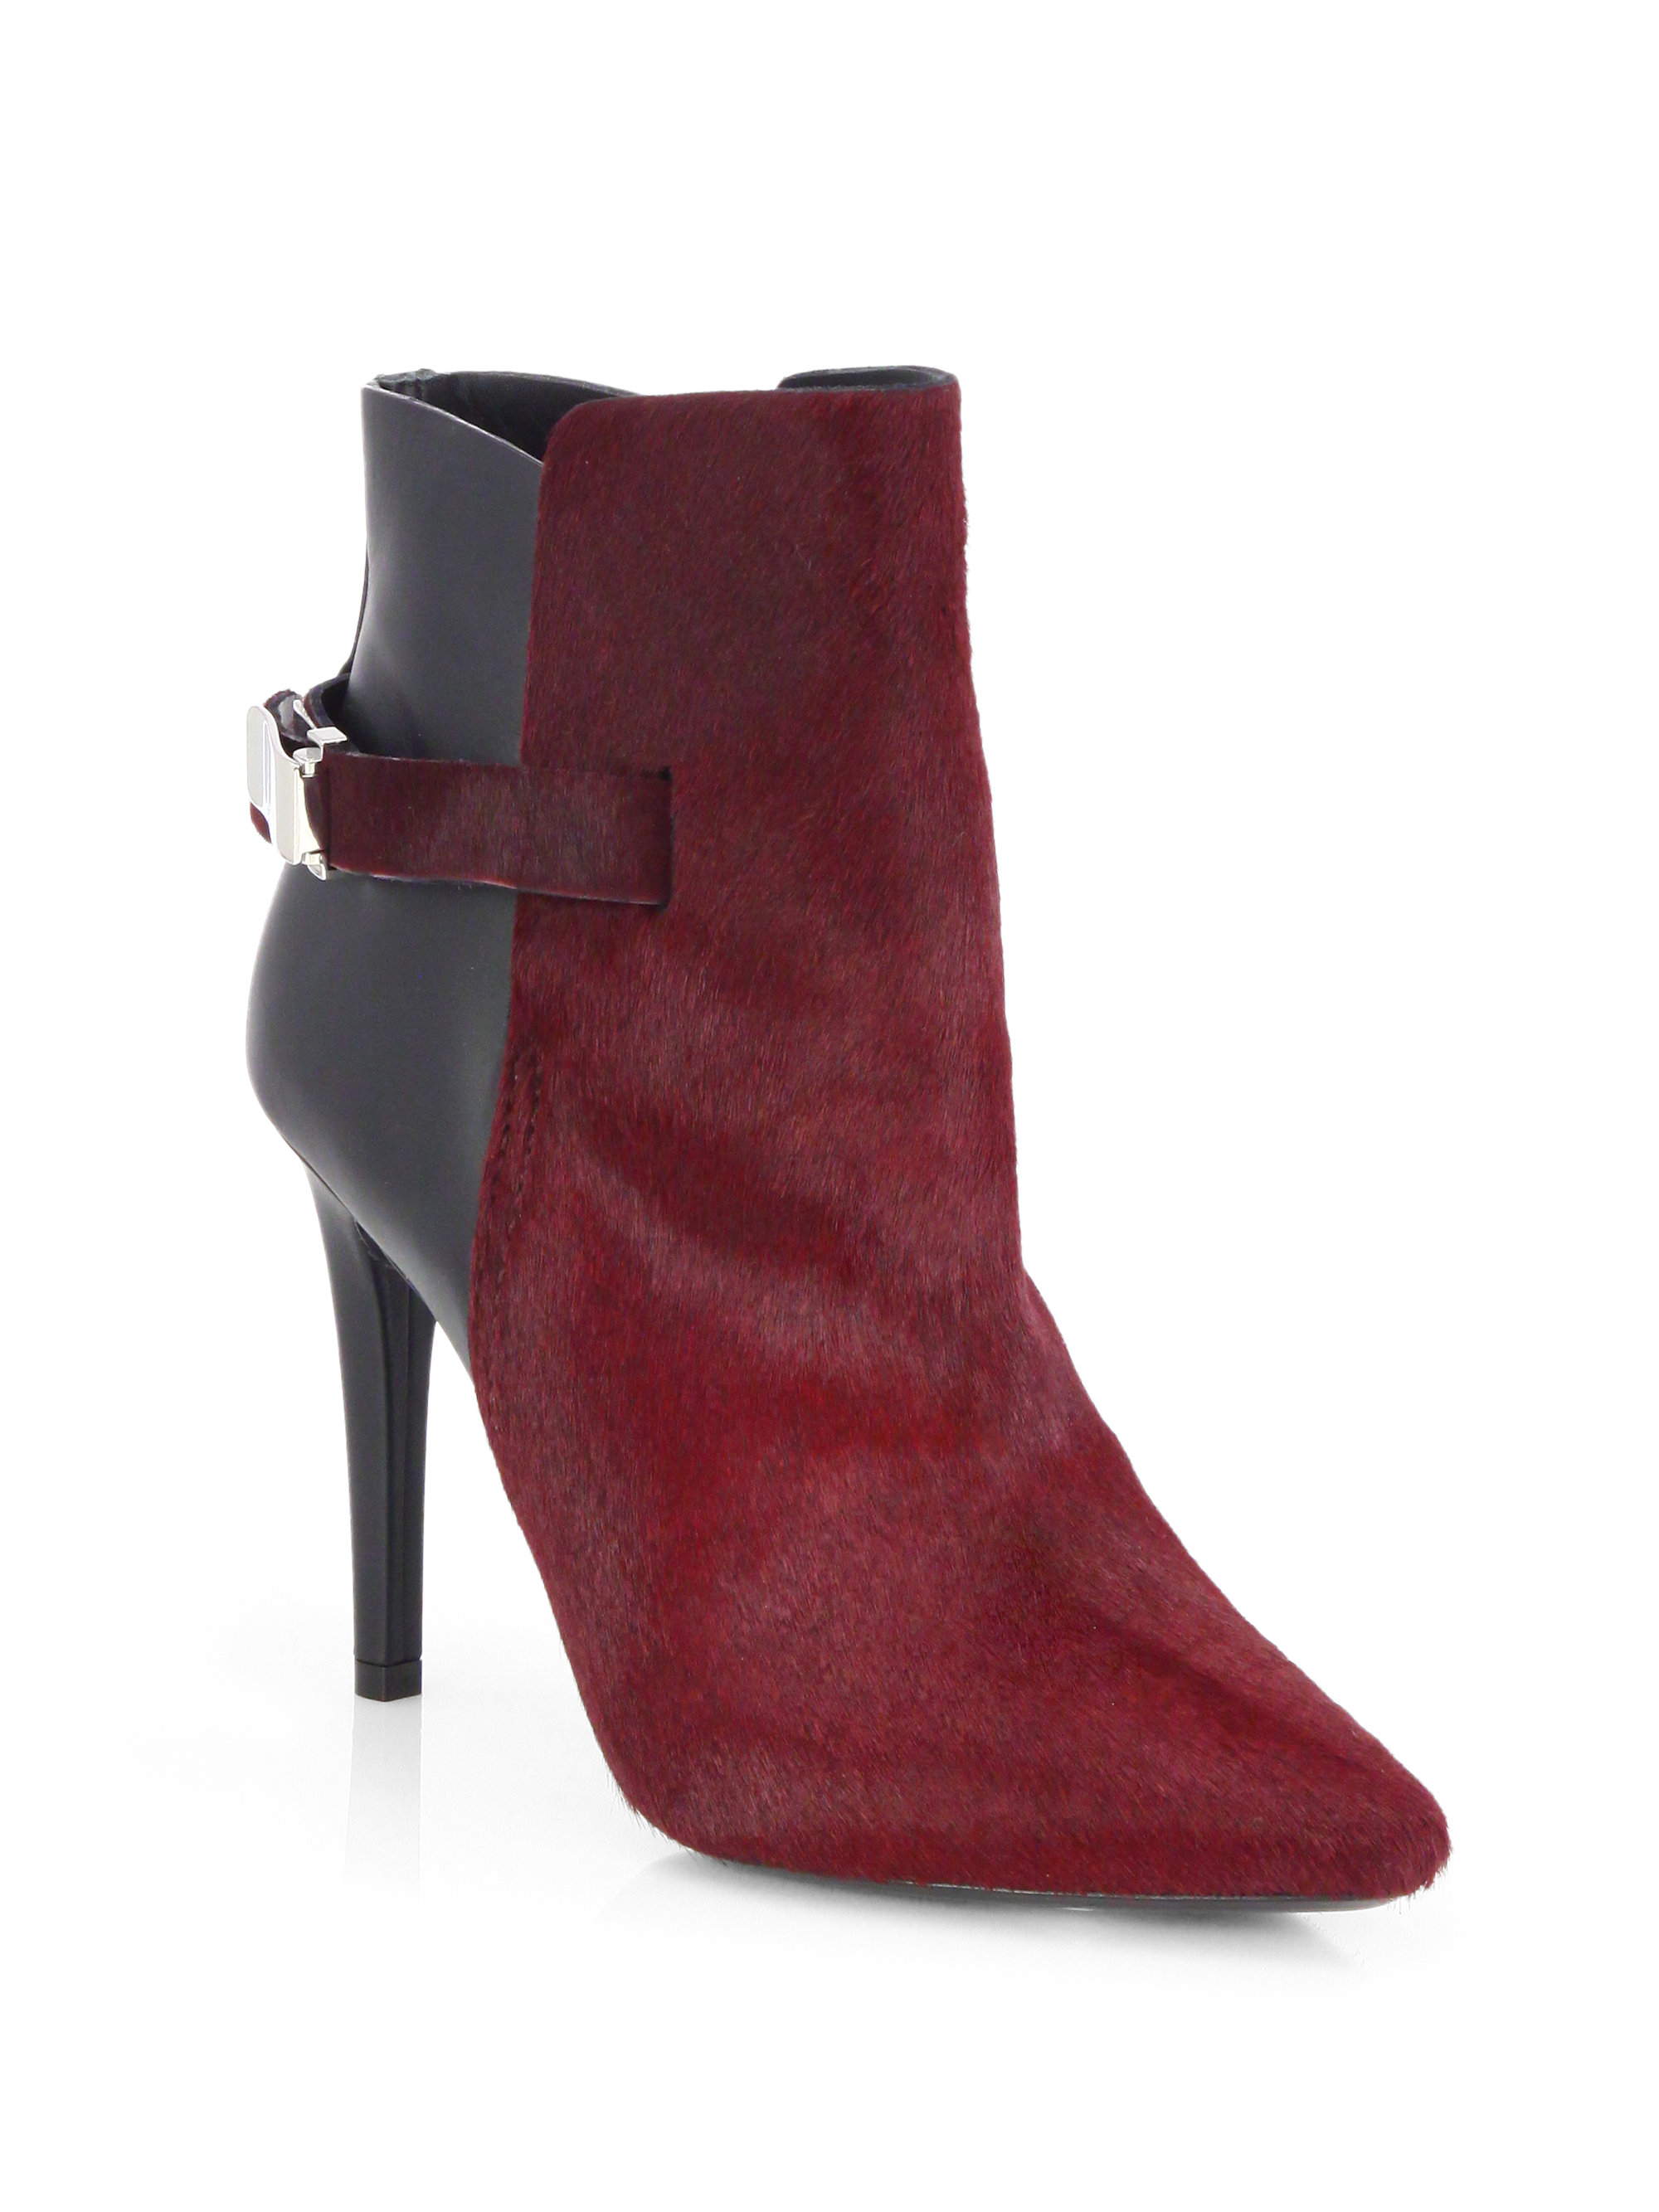 Lyst - Proenza Schouler Calf Hair & Leather Point-Toe Booties in Red